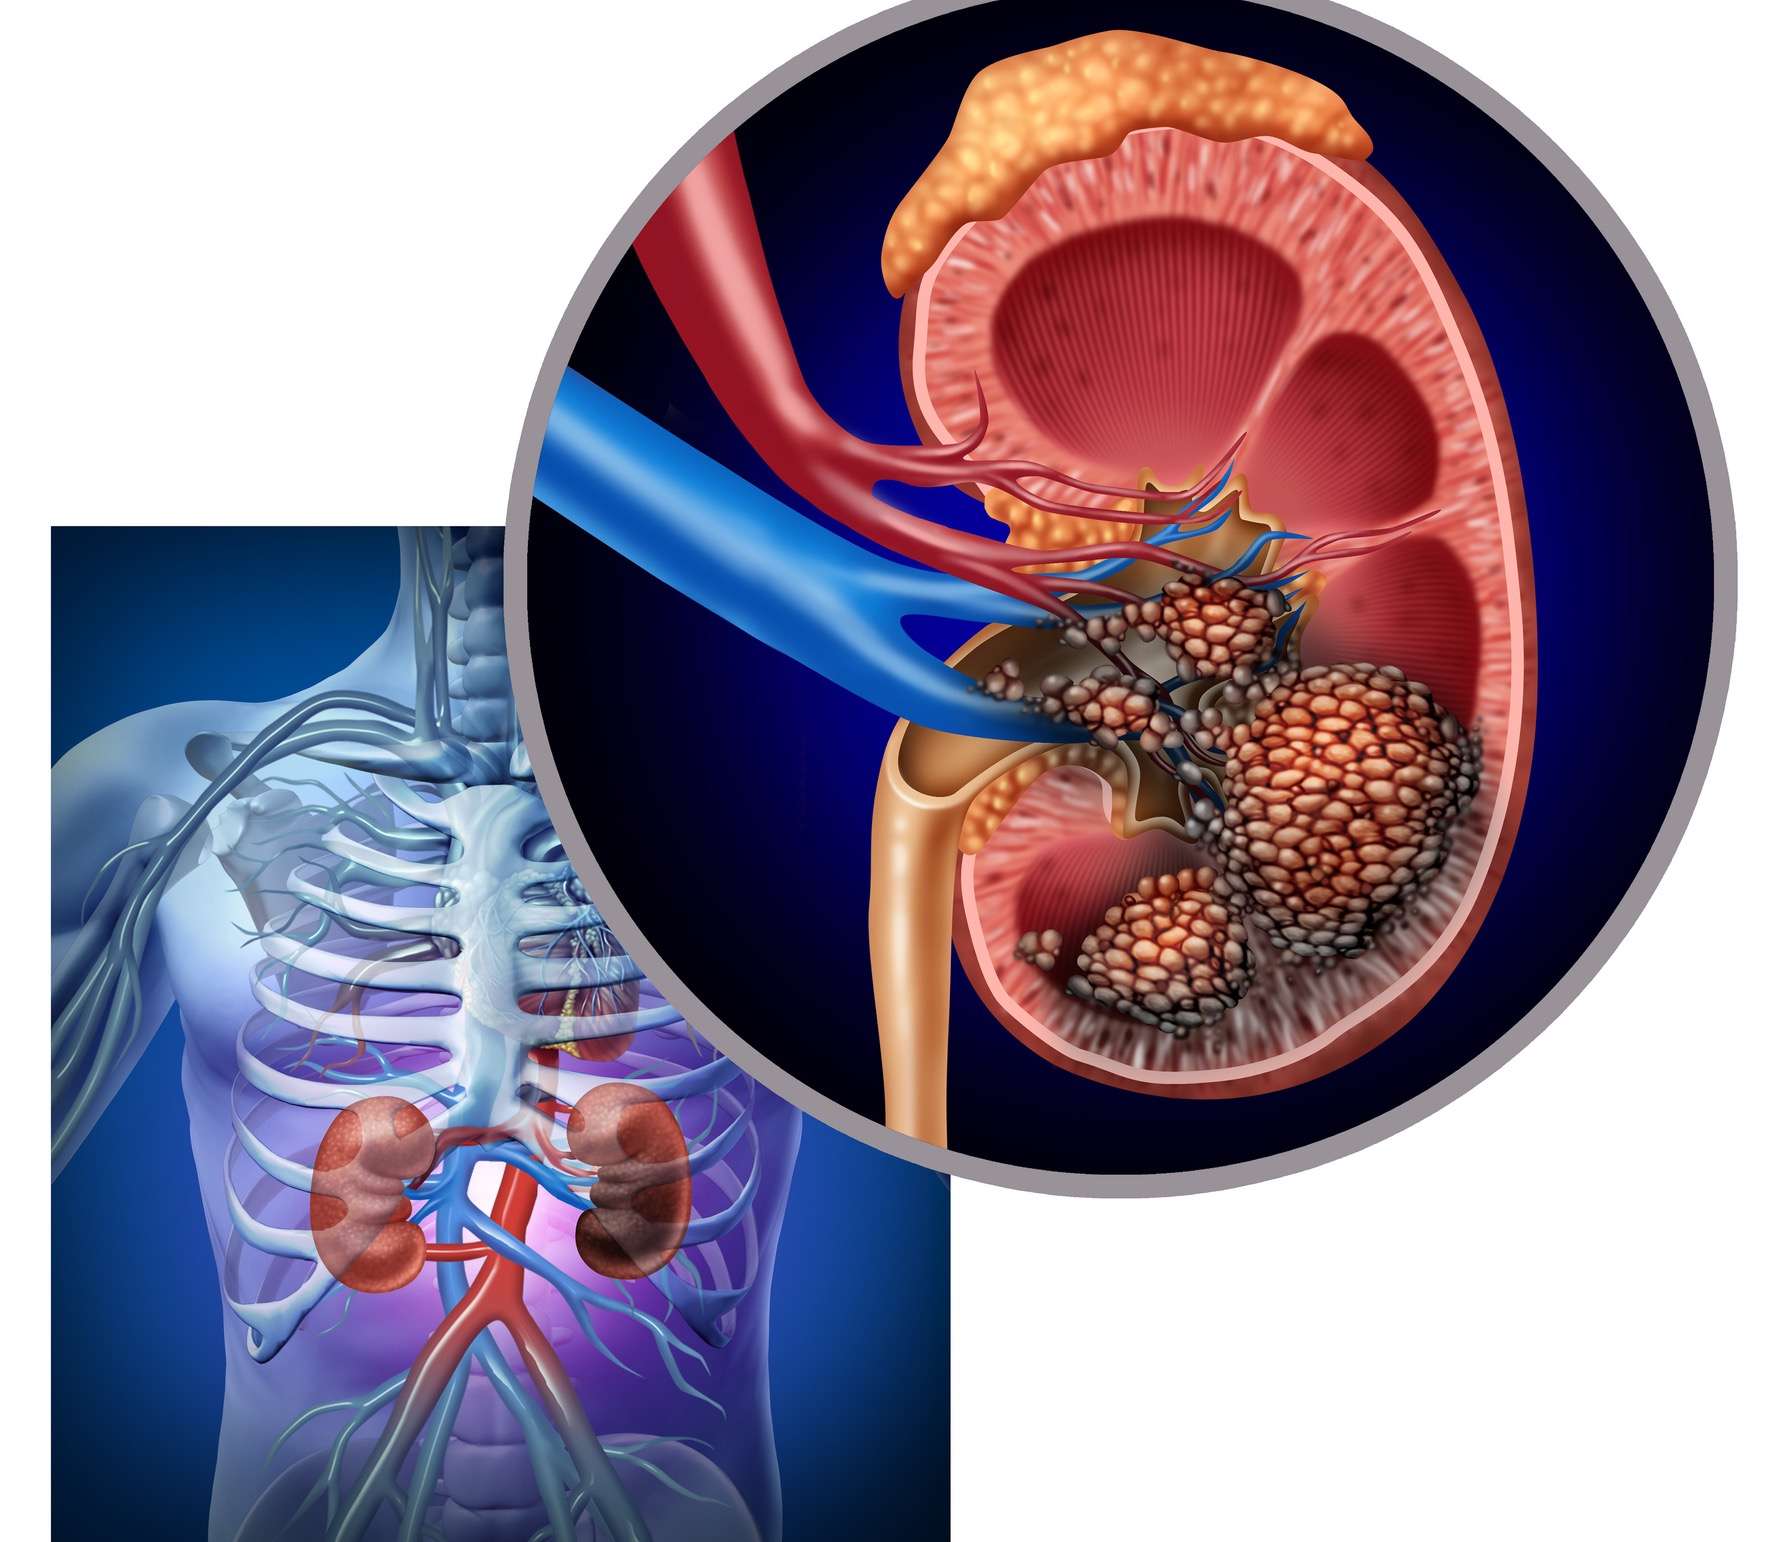 * An Overview of Kidney Cancer